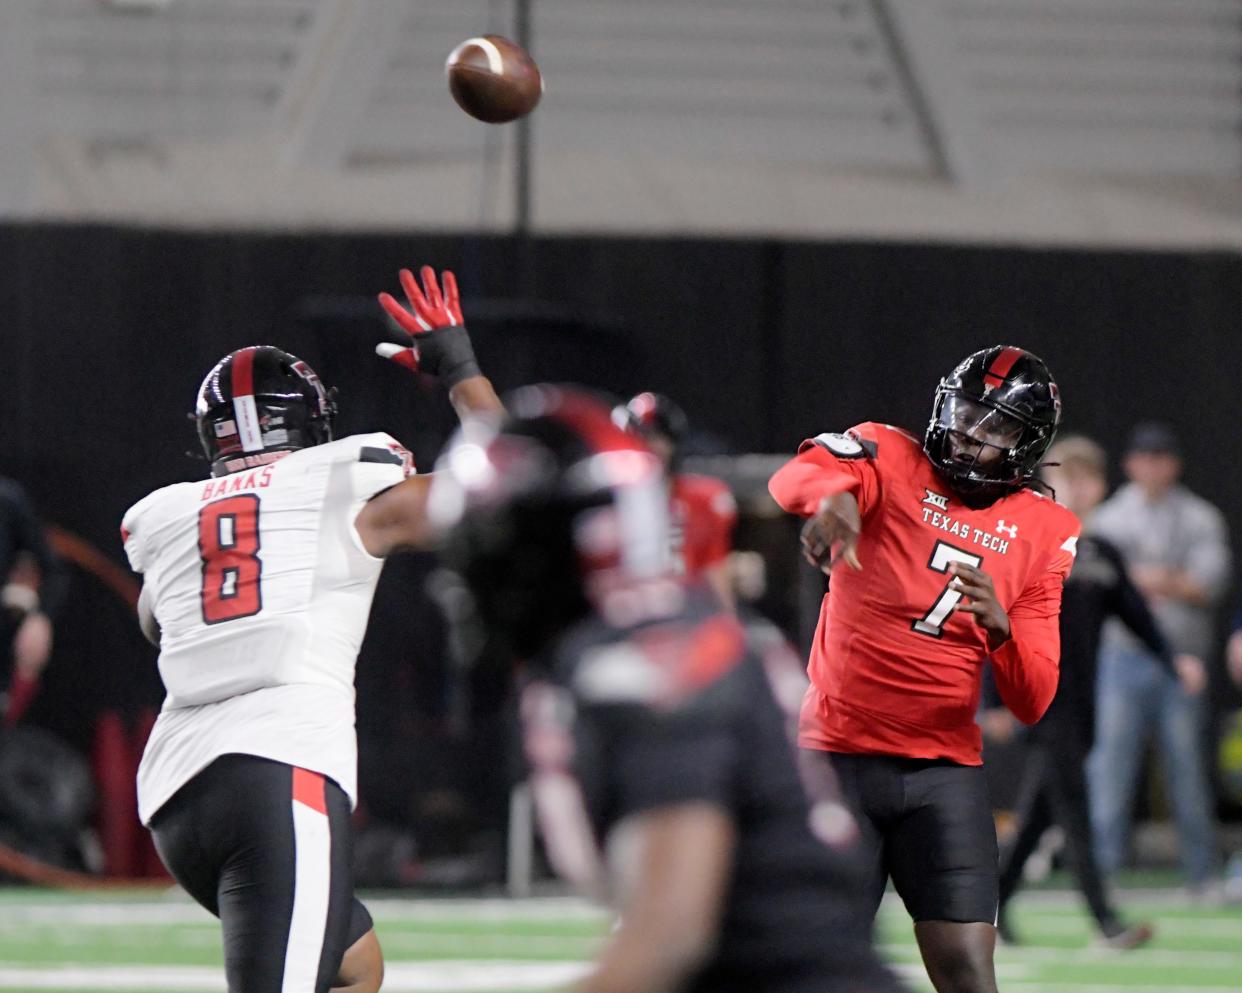 Texas Tech quarterback Cameran Brown (7) delivers a pass over defensive tackle Dooda Banks (8) during the Red Raiders' spring game Saturday at the Sports Performance Center. Brown threw two touchdown passes in the game.